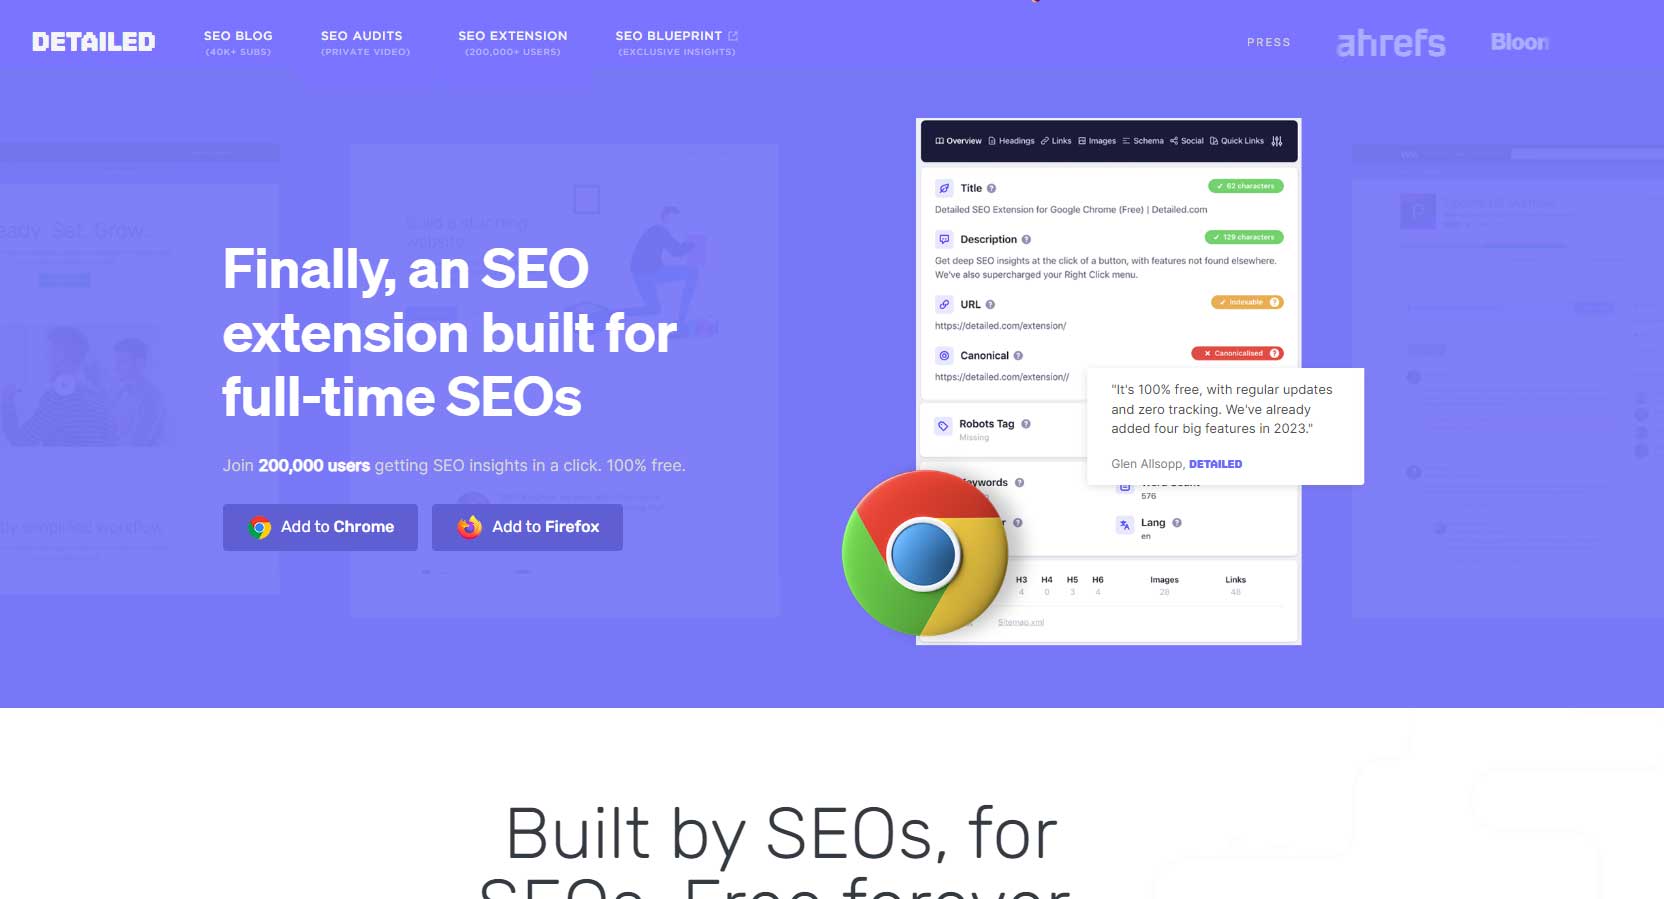 Detailed SEO extension guide